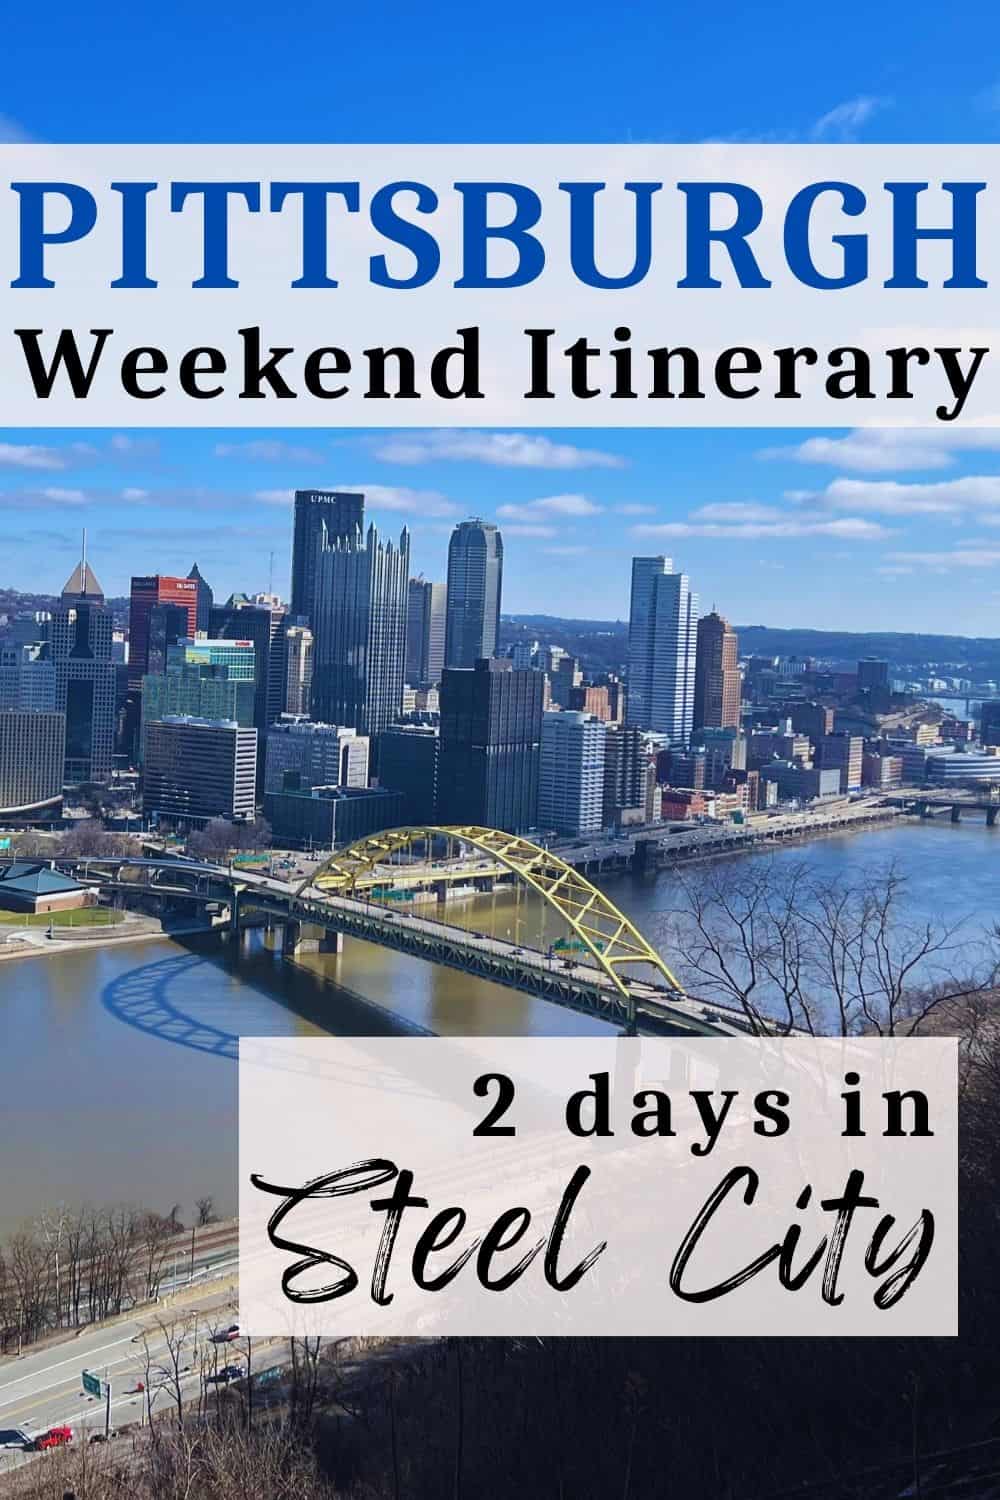 Pittsburgh Skyline Photo with the words "Pittsburgh Weekend Itinerary, 2 Days in Steel City" written on top